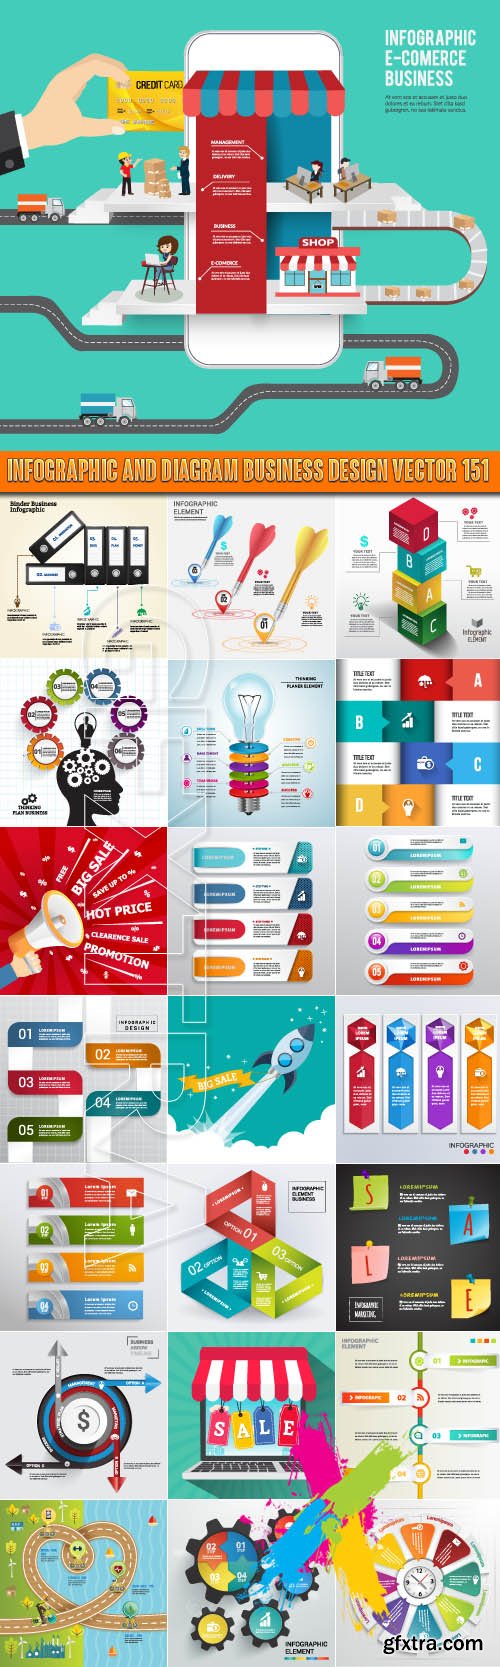 Infographic and diagram business design vector 151